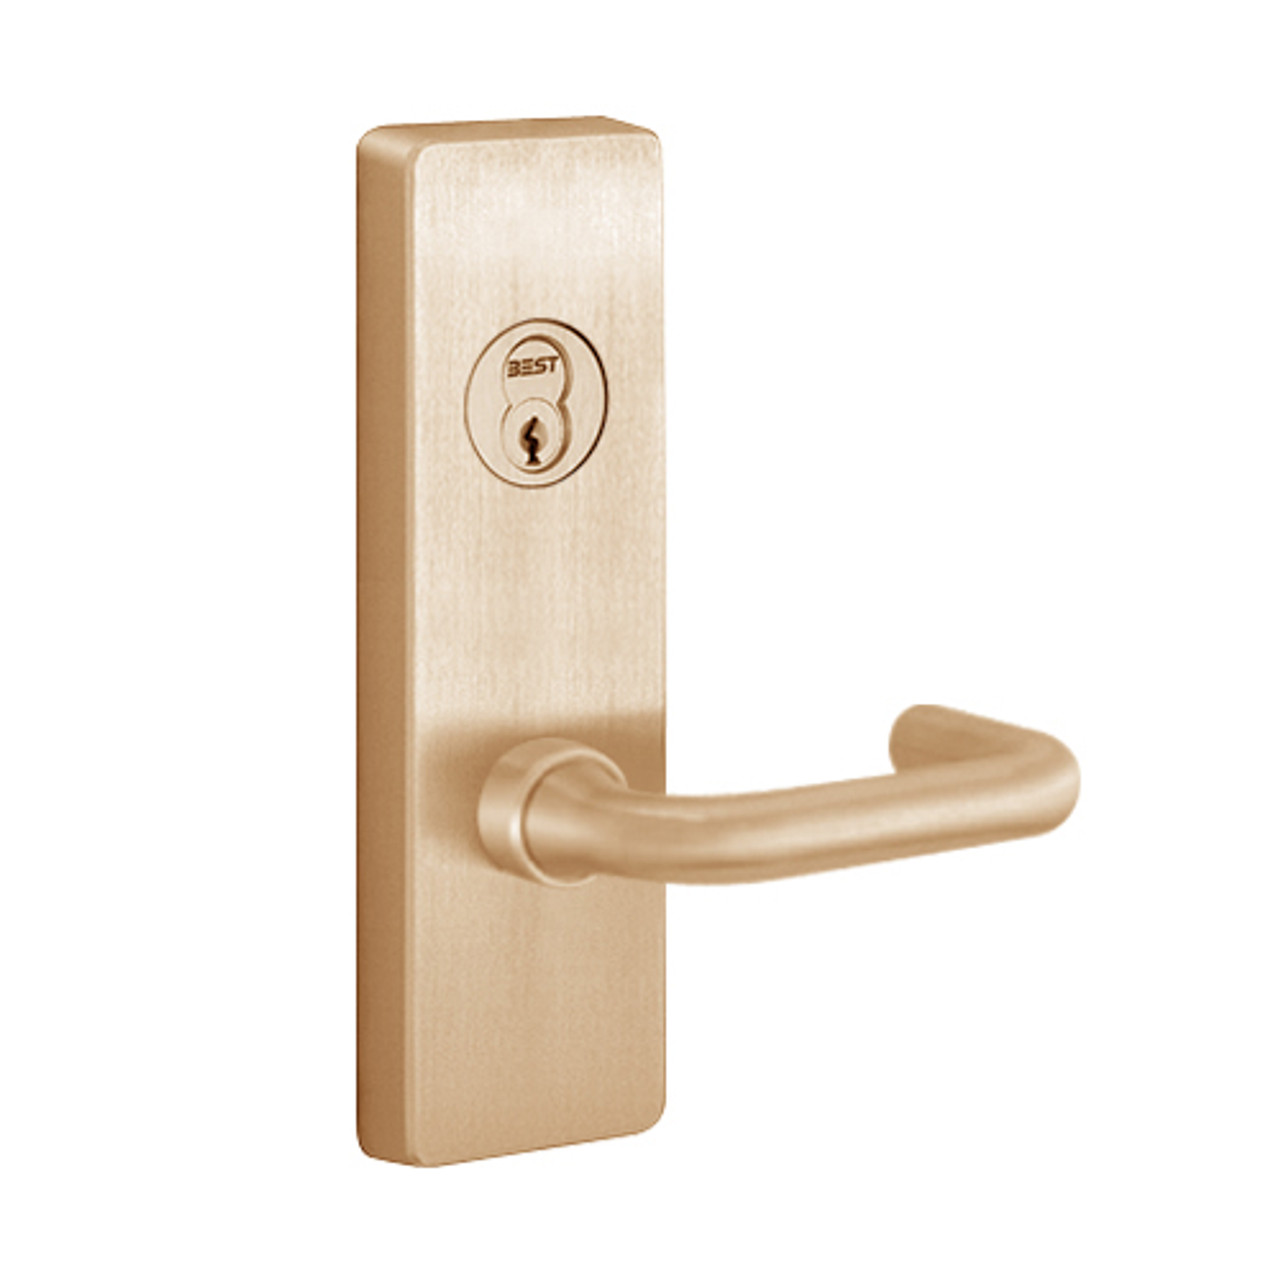 4903C-612-LHR PHI Key Retracts Latchbolt Trim with C Lever Design for Apex and Olympian Series Exit Device in Satin Bronze Finish